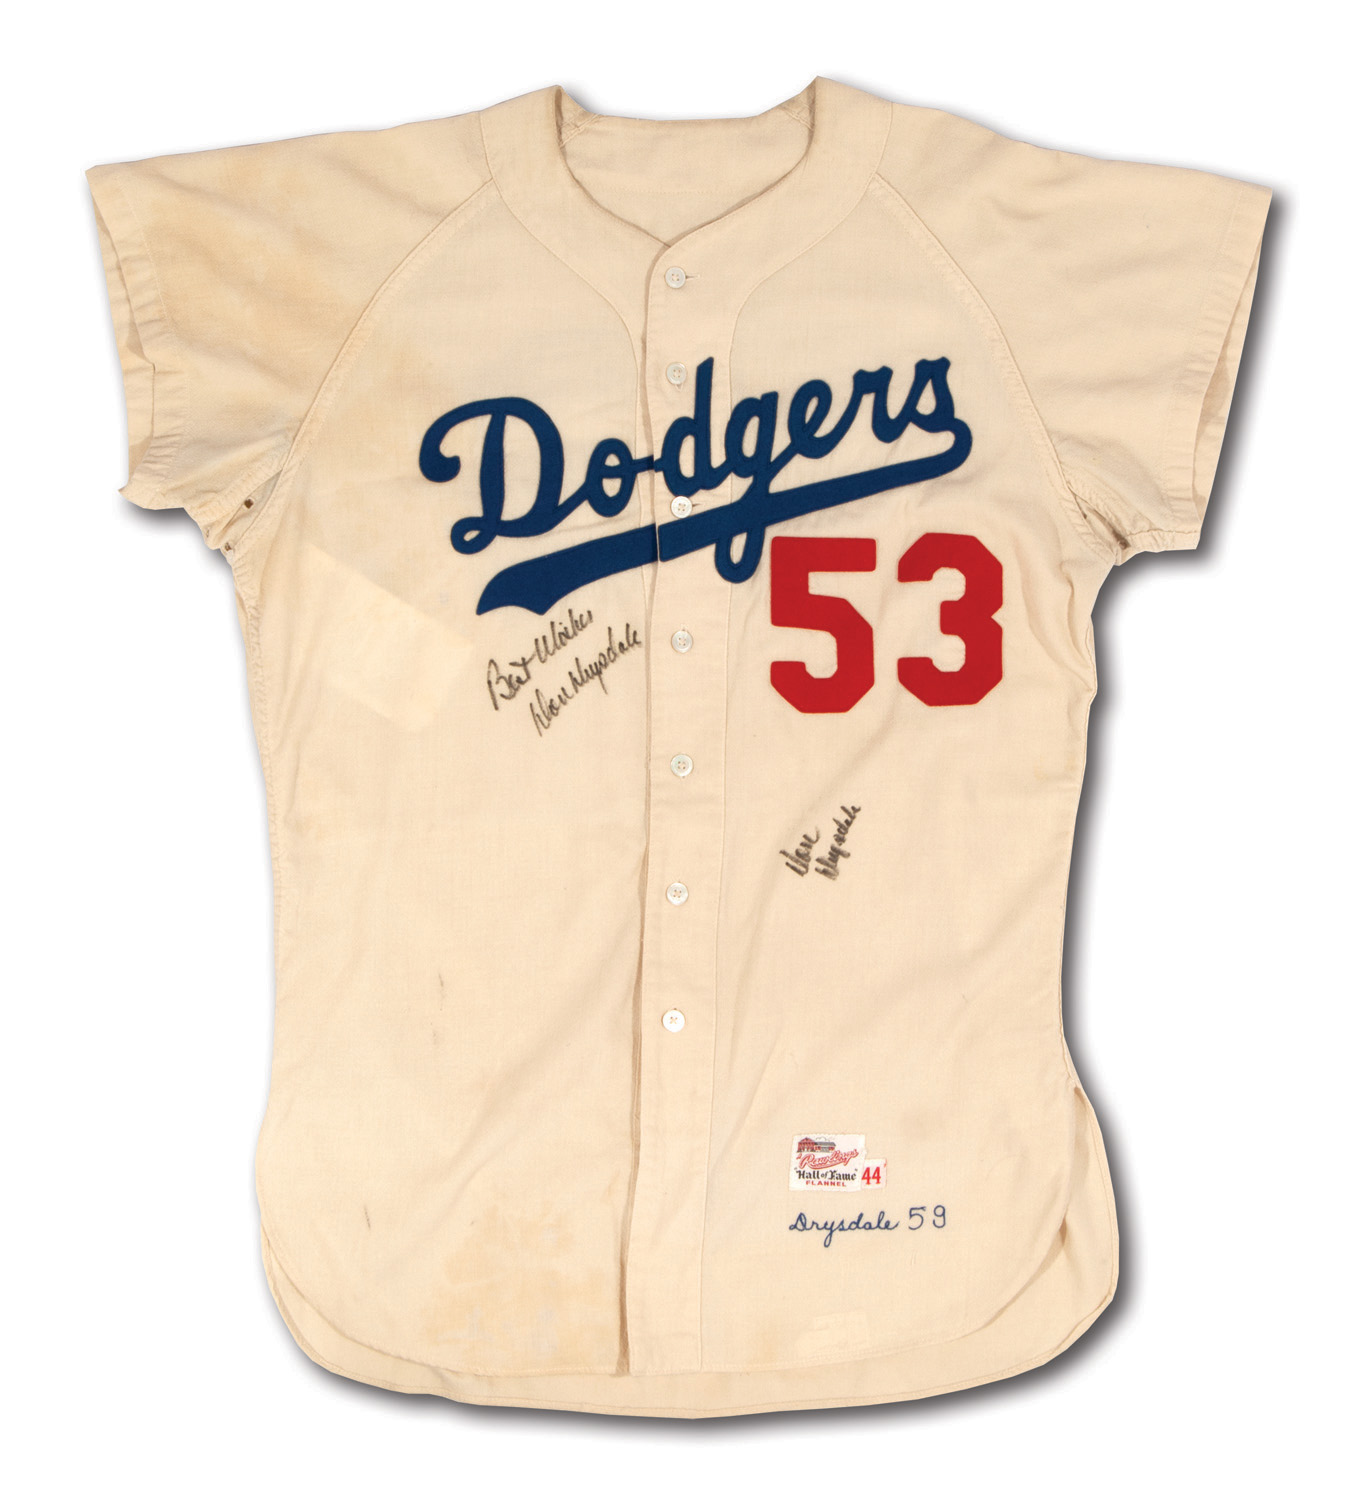 los angeles dodgers home jersey